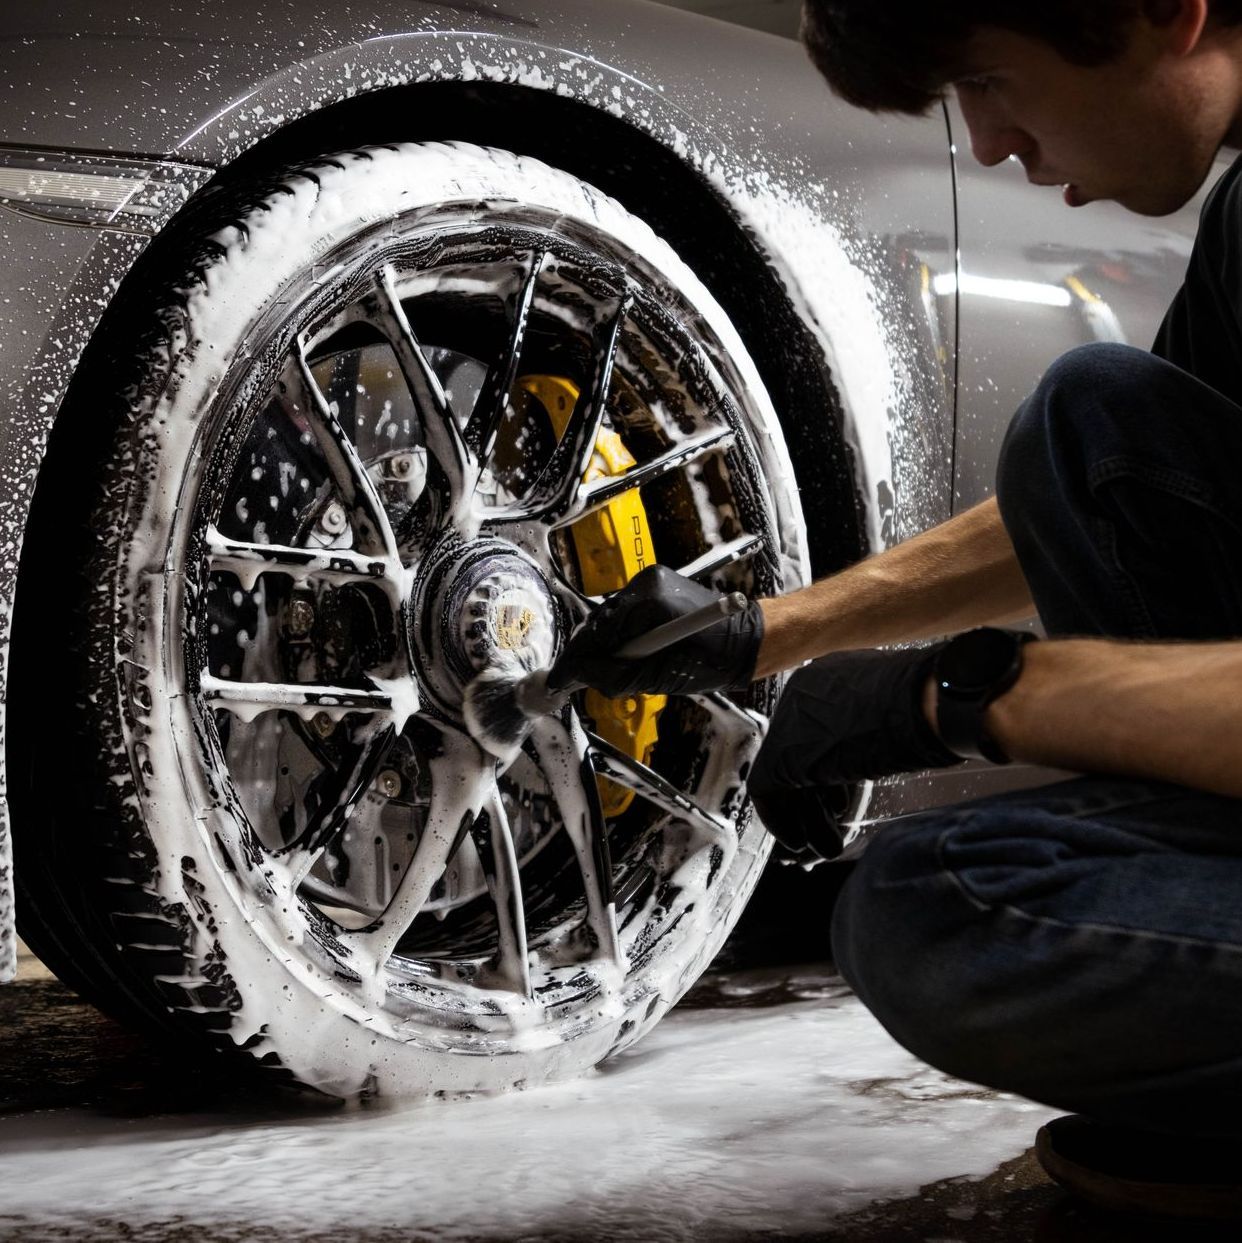 A man is cleaning a car wheel with soap